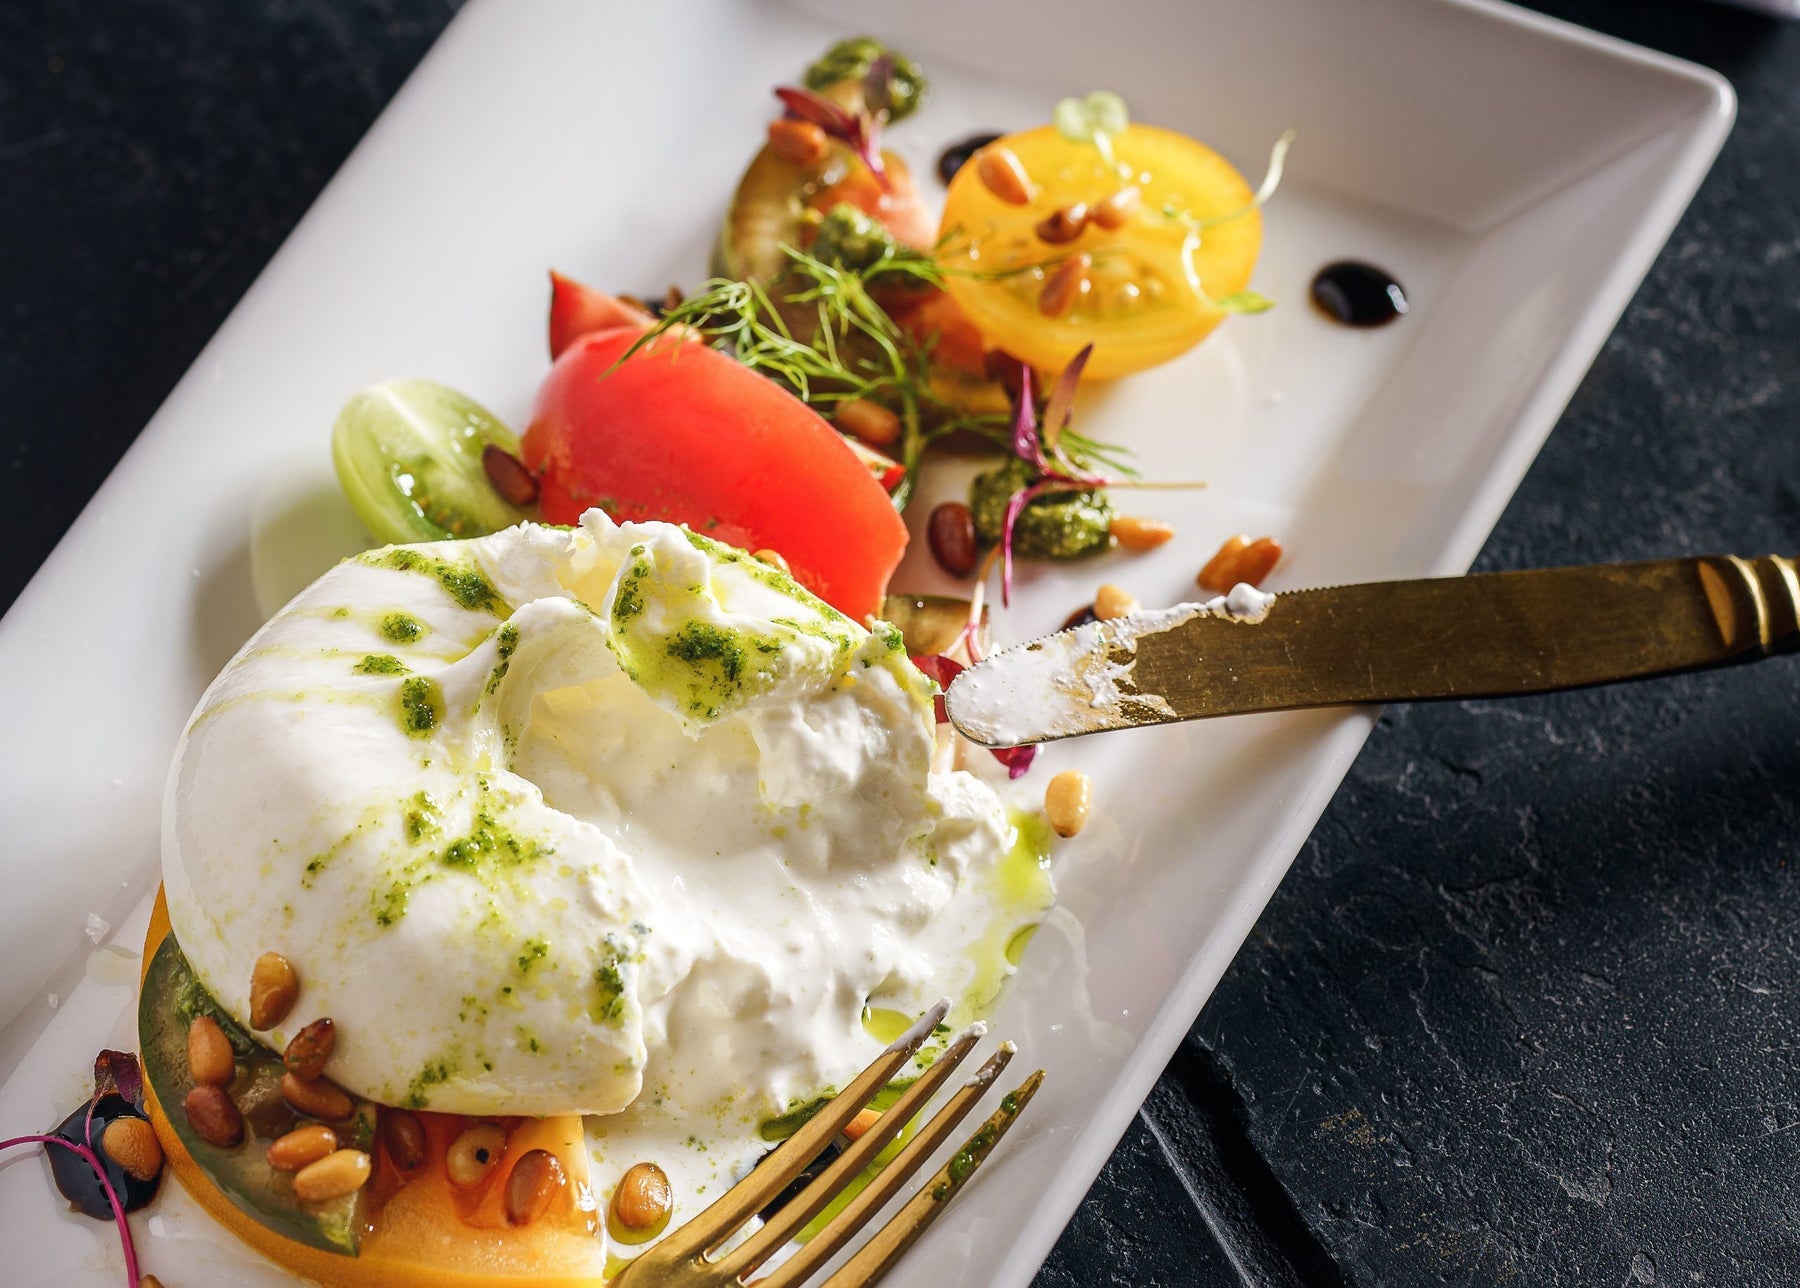 Burrata: history, how it is made, and the combinations